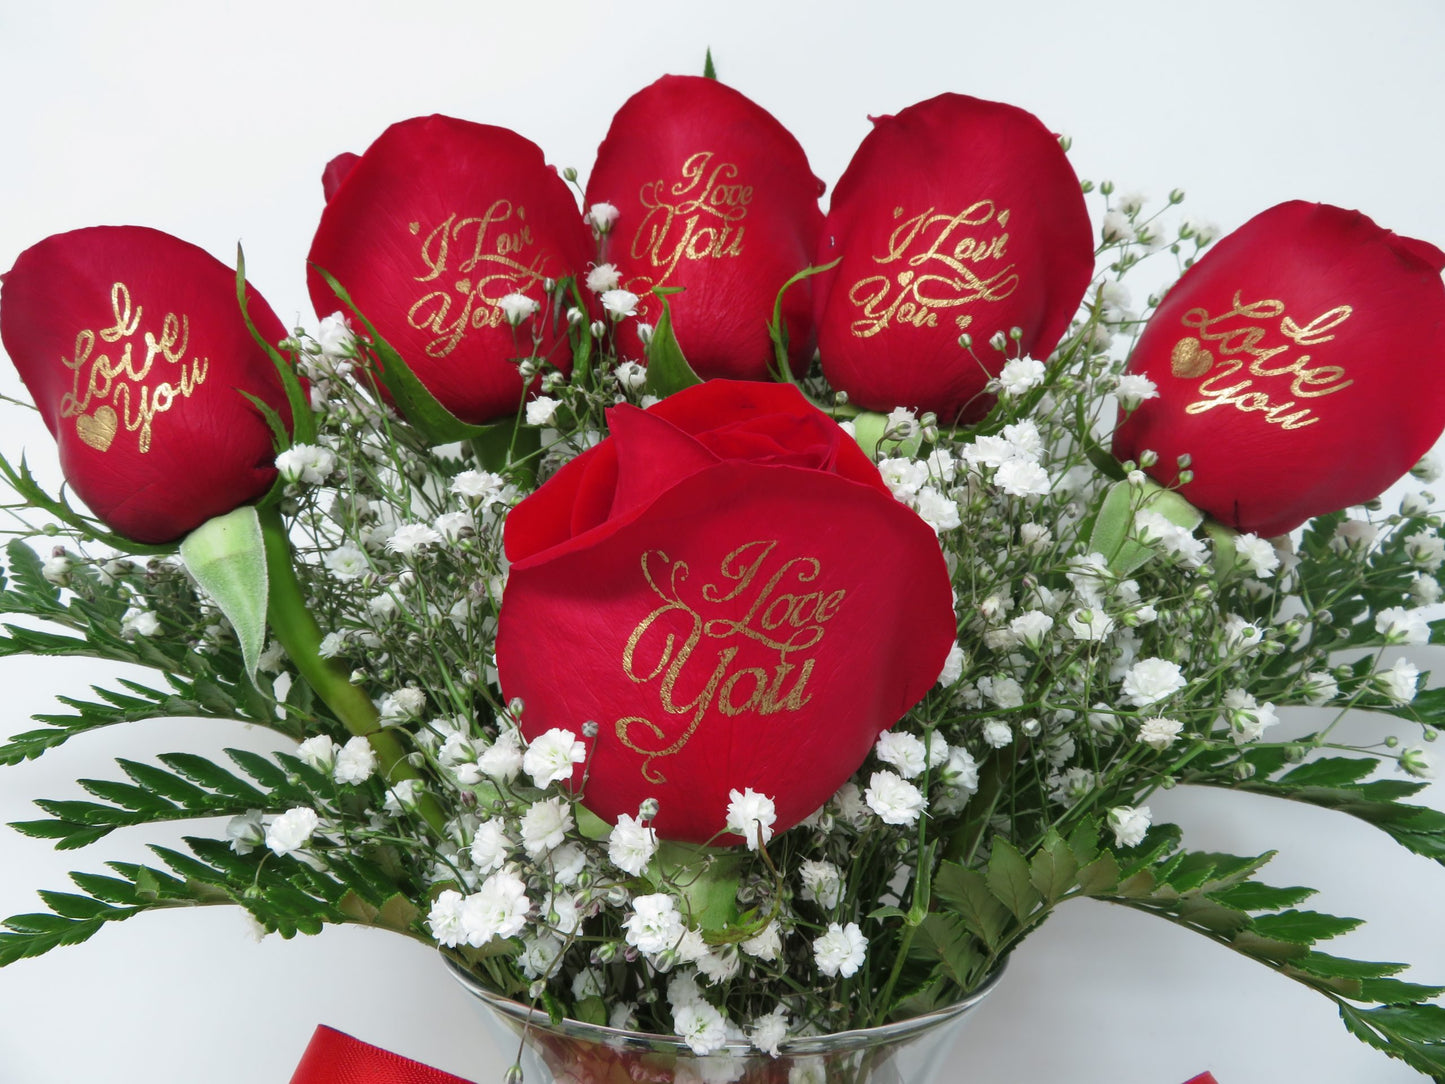 6 Red Roses, "I Love You" in Gold Lettering